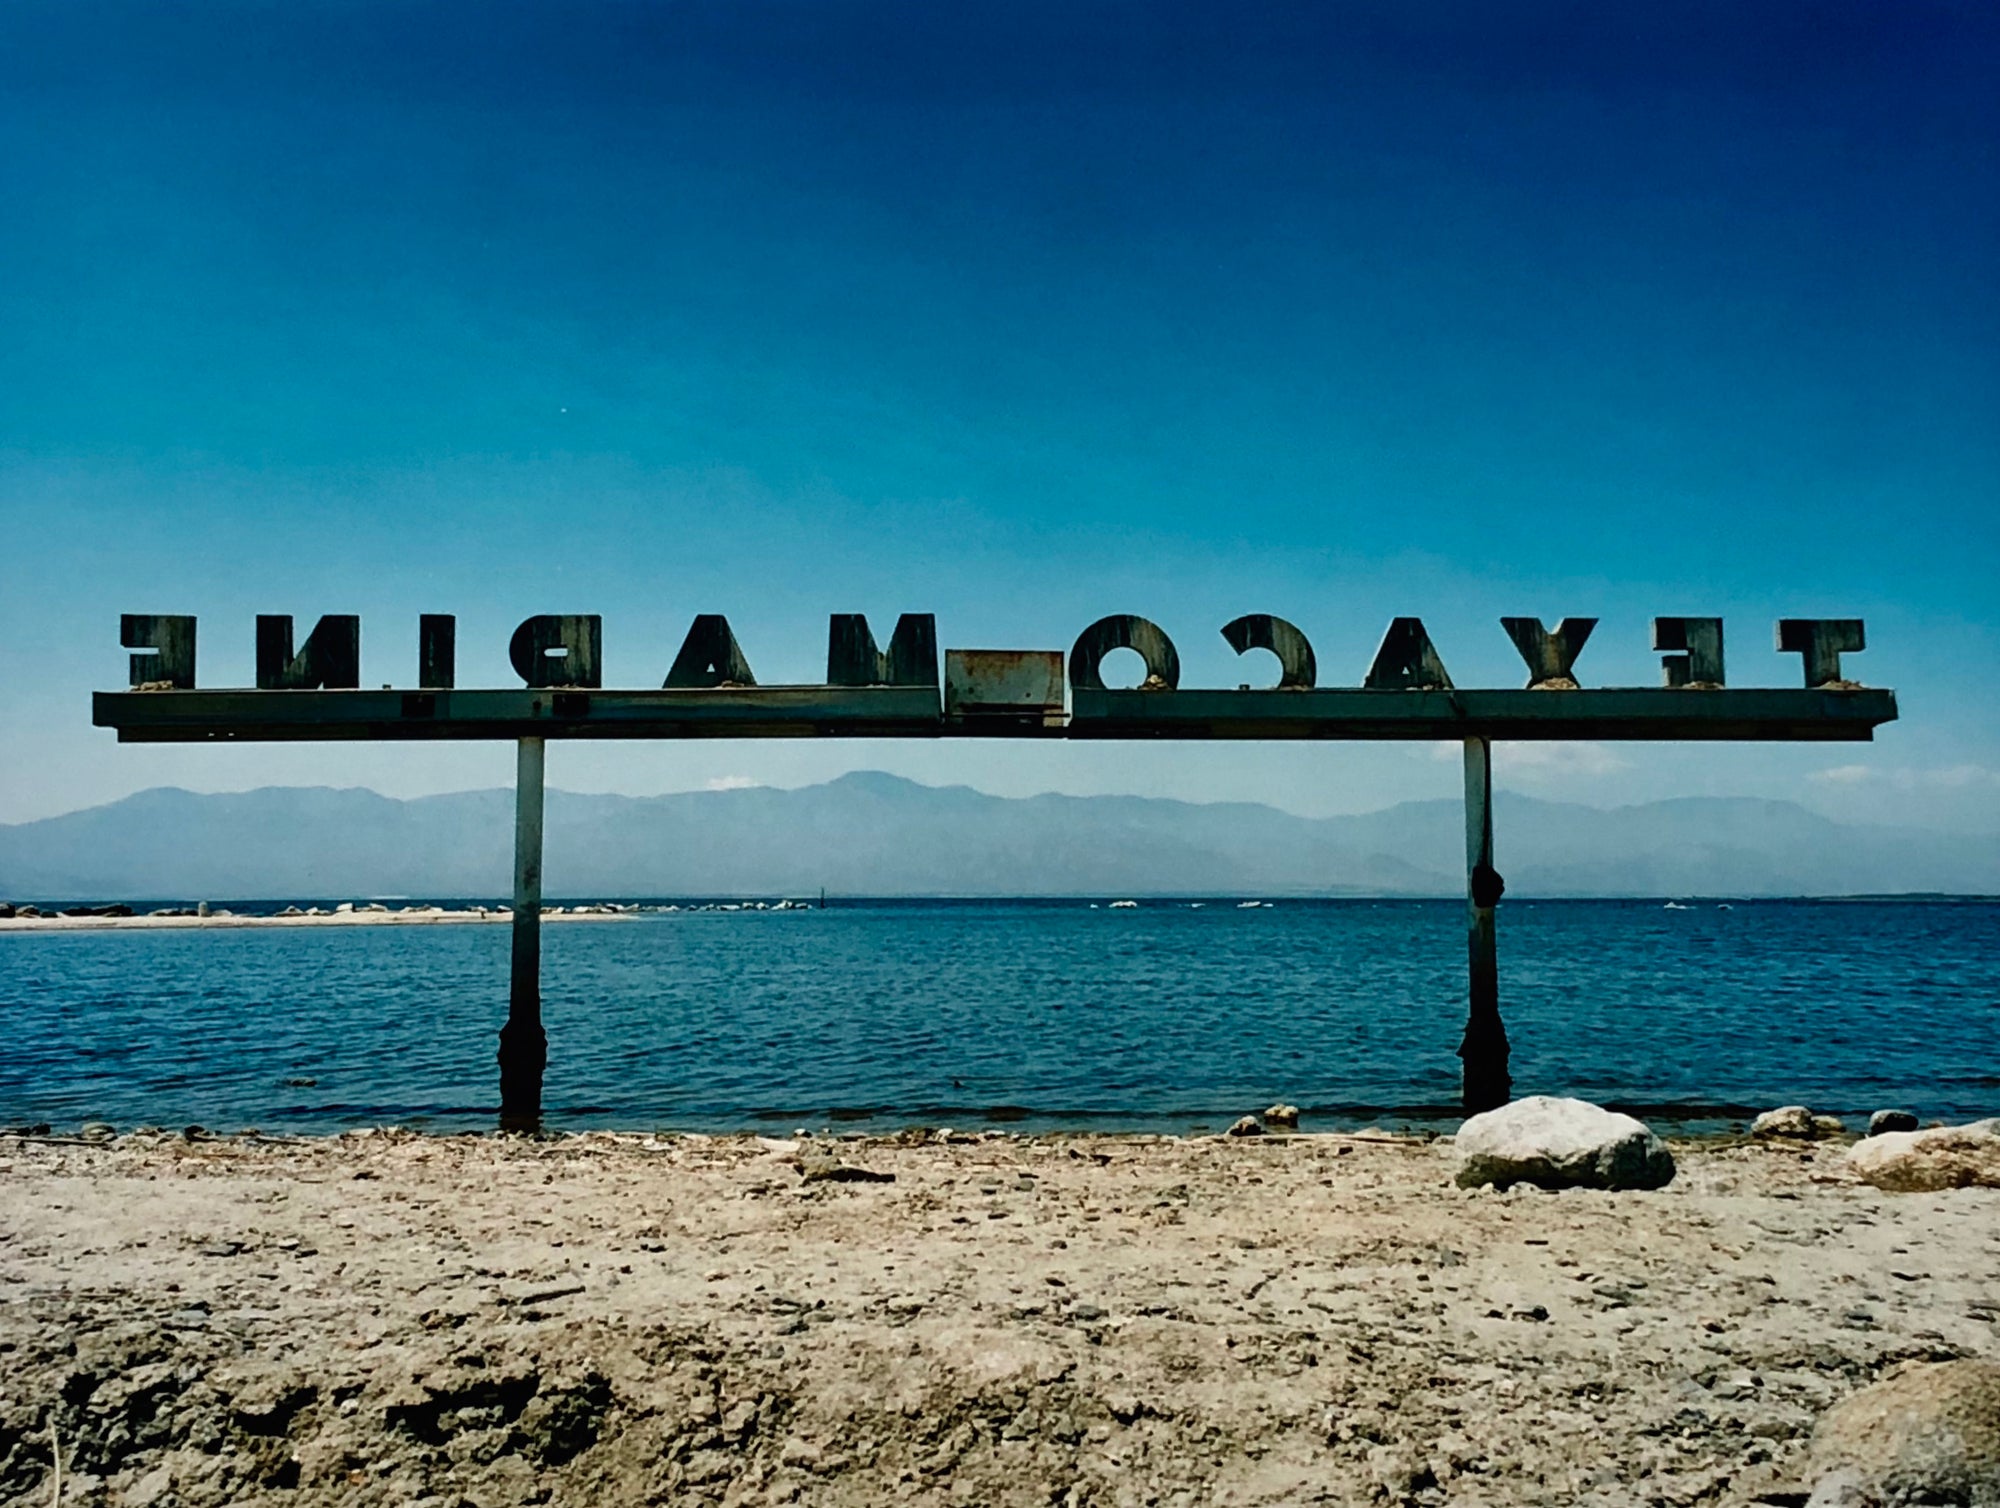 Texaco Marine sign on the Salton Sea beach, with a blue sky and mountains in the distance